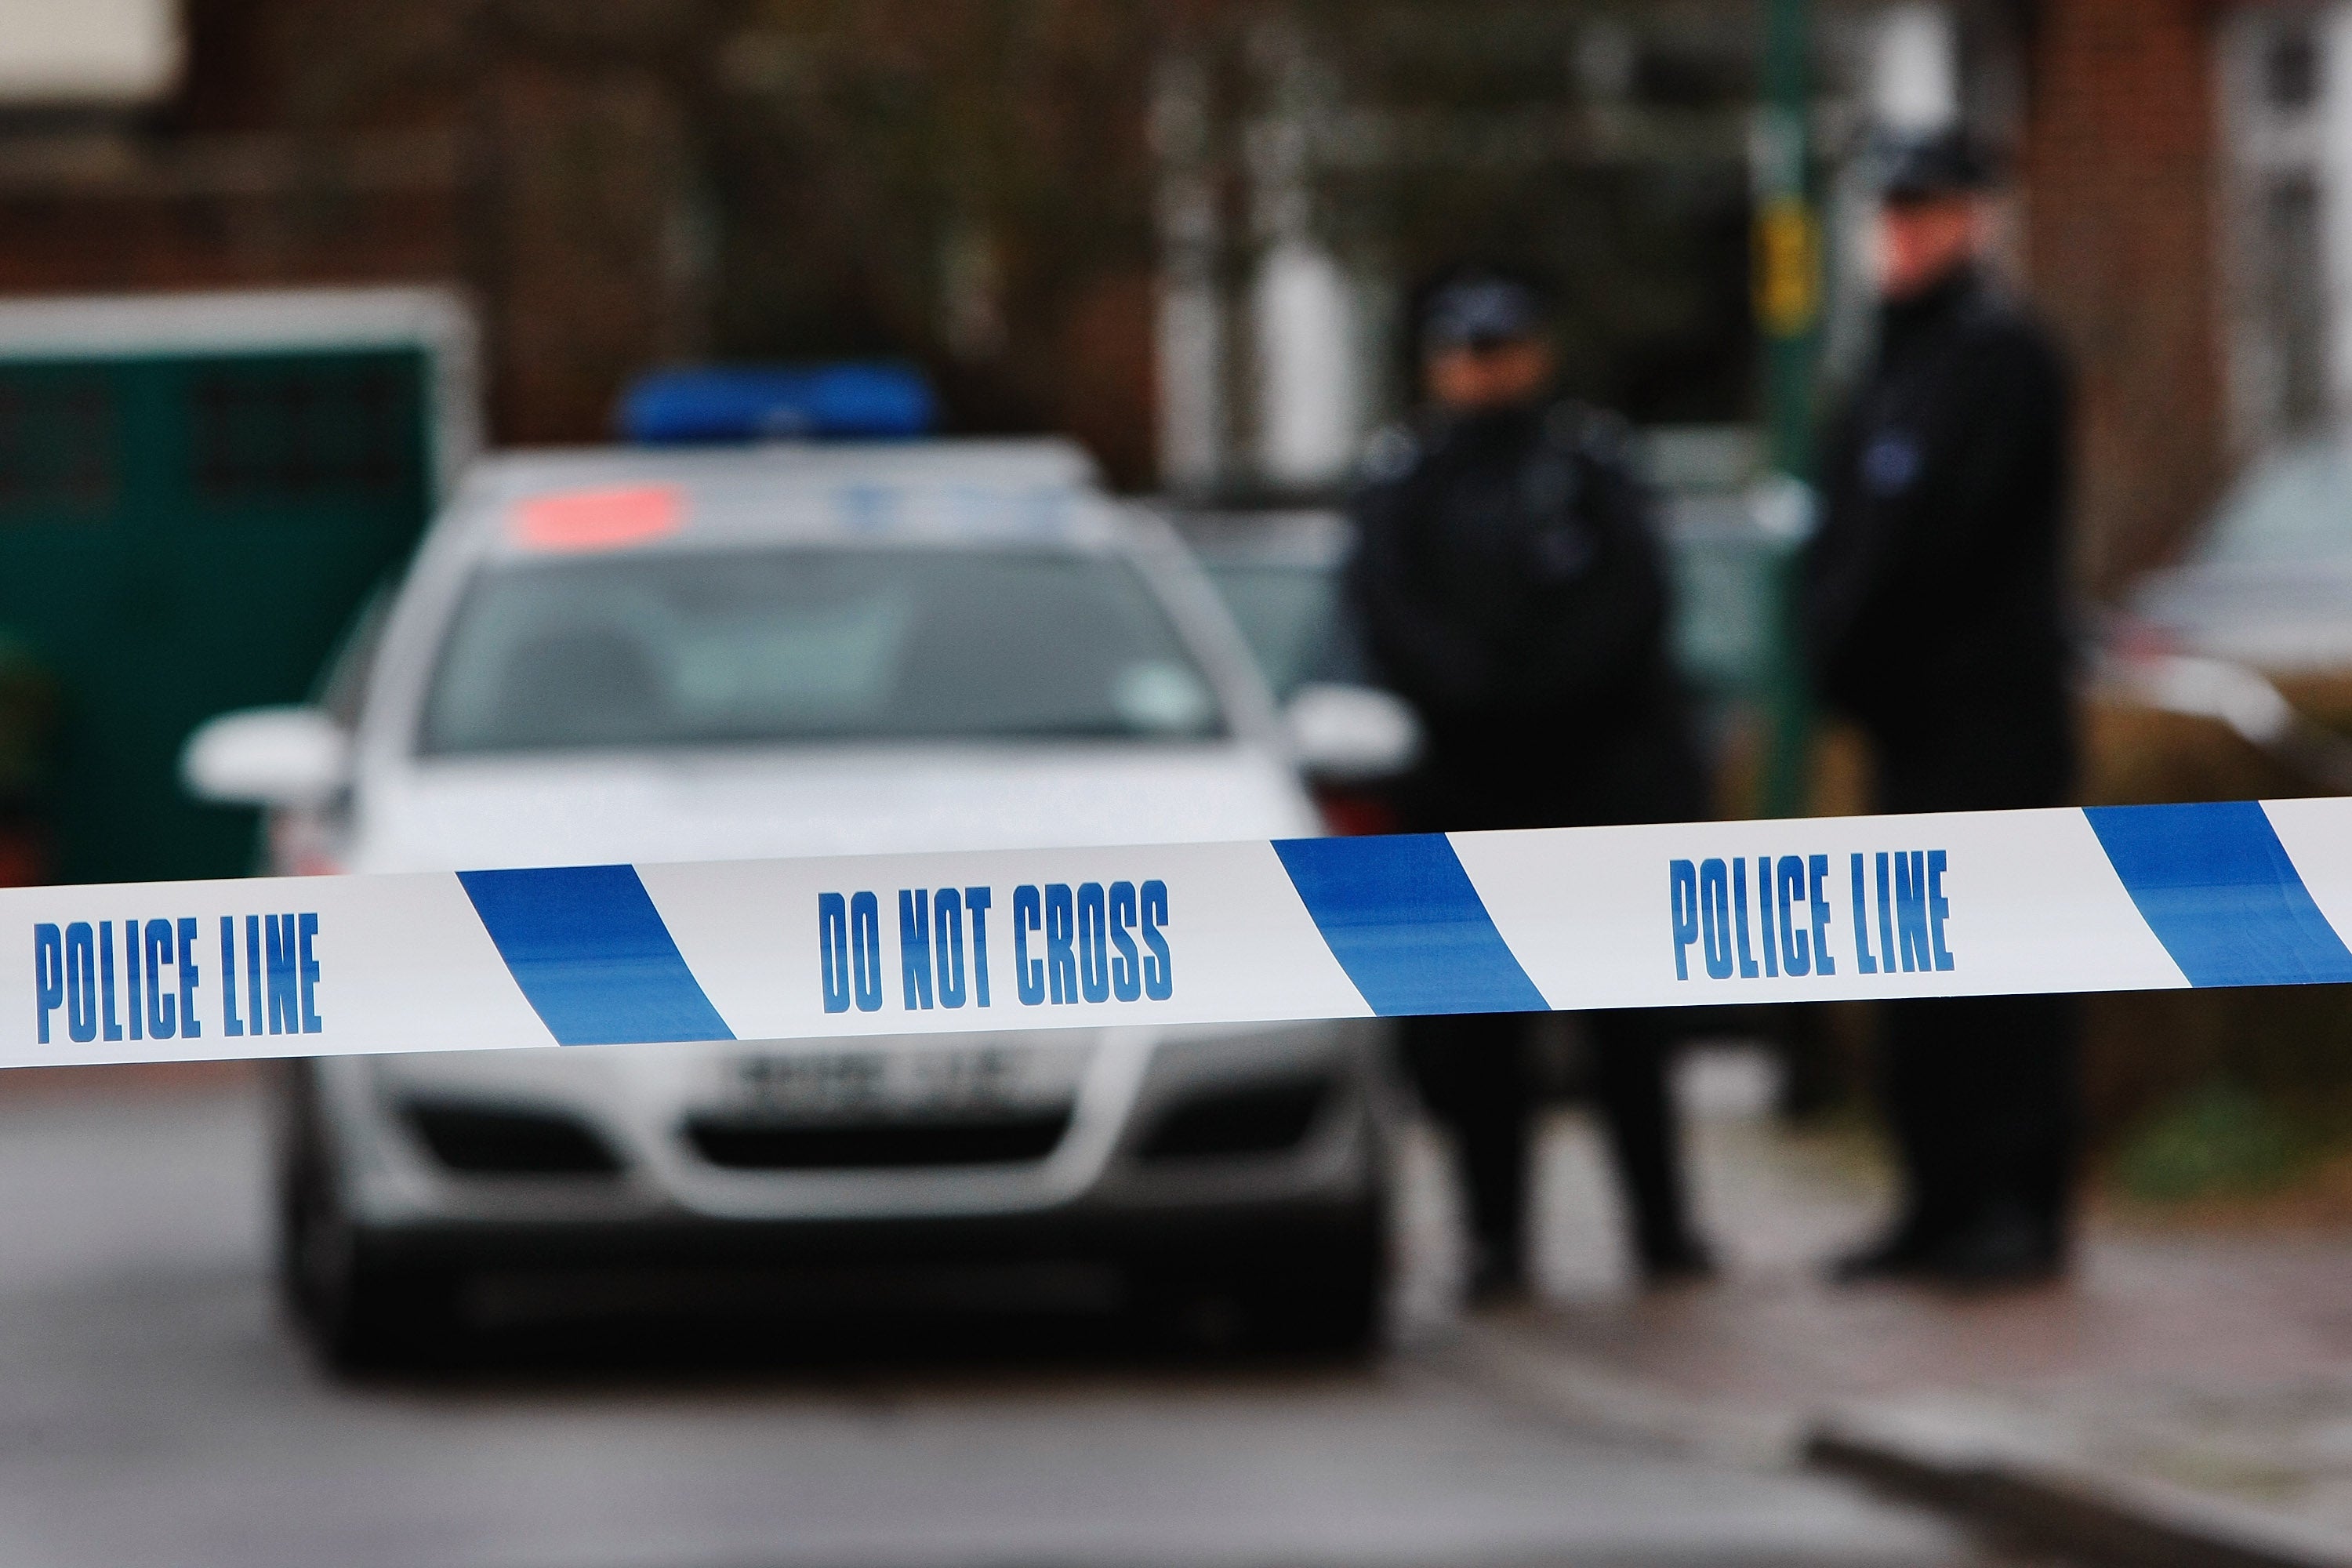 Police were called to a street near Regent’s Park in London